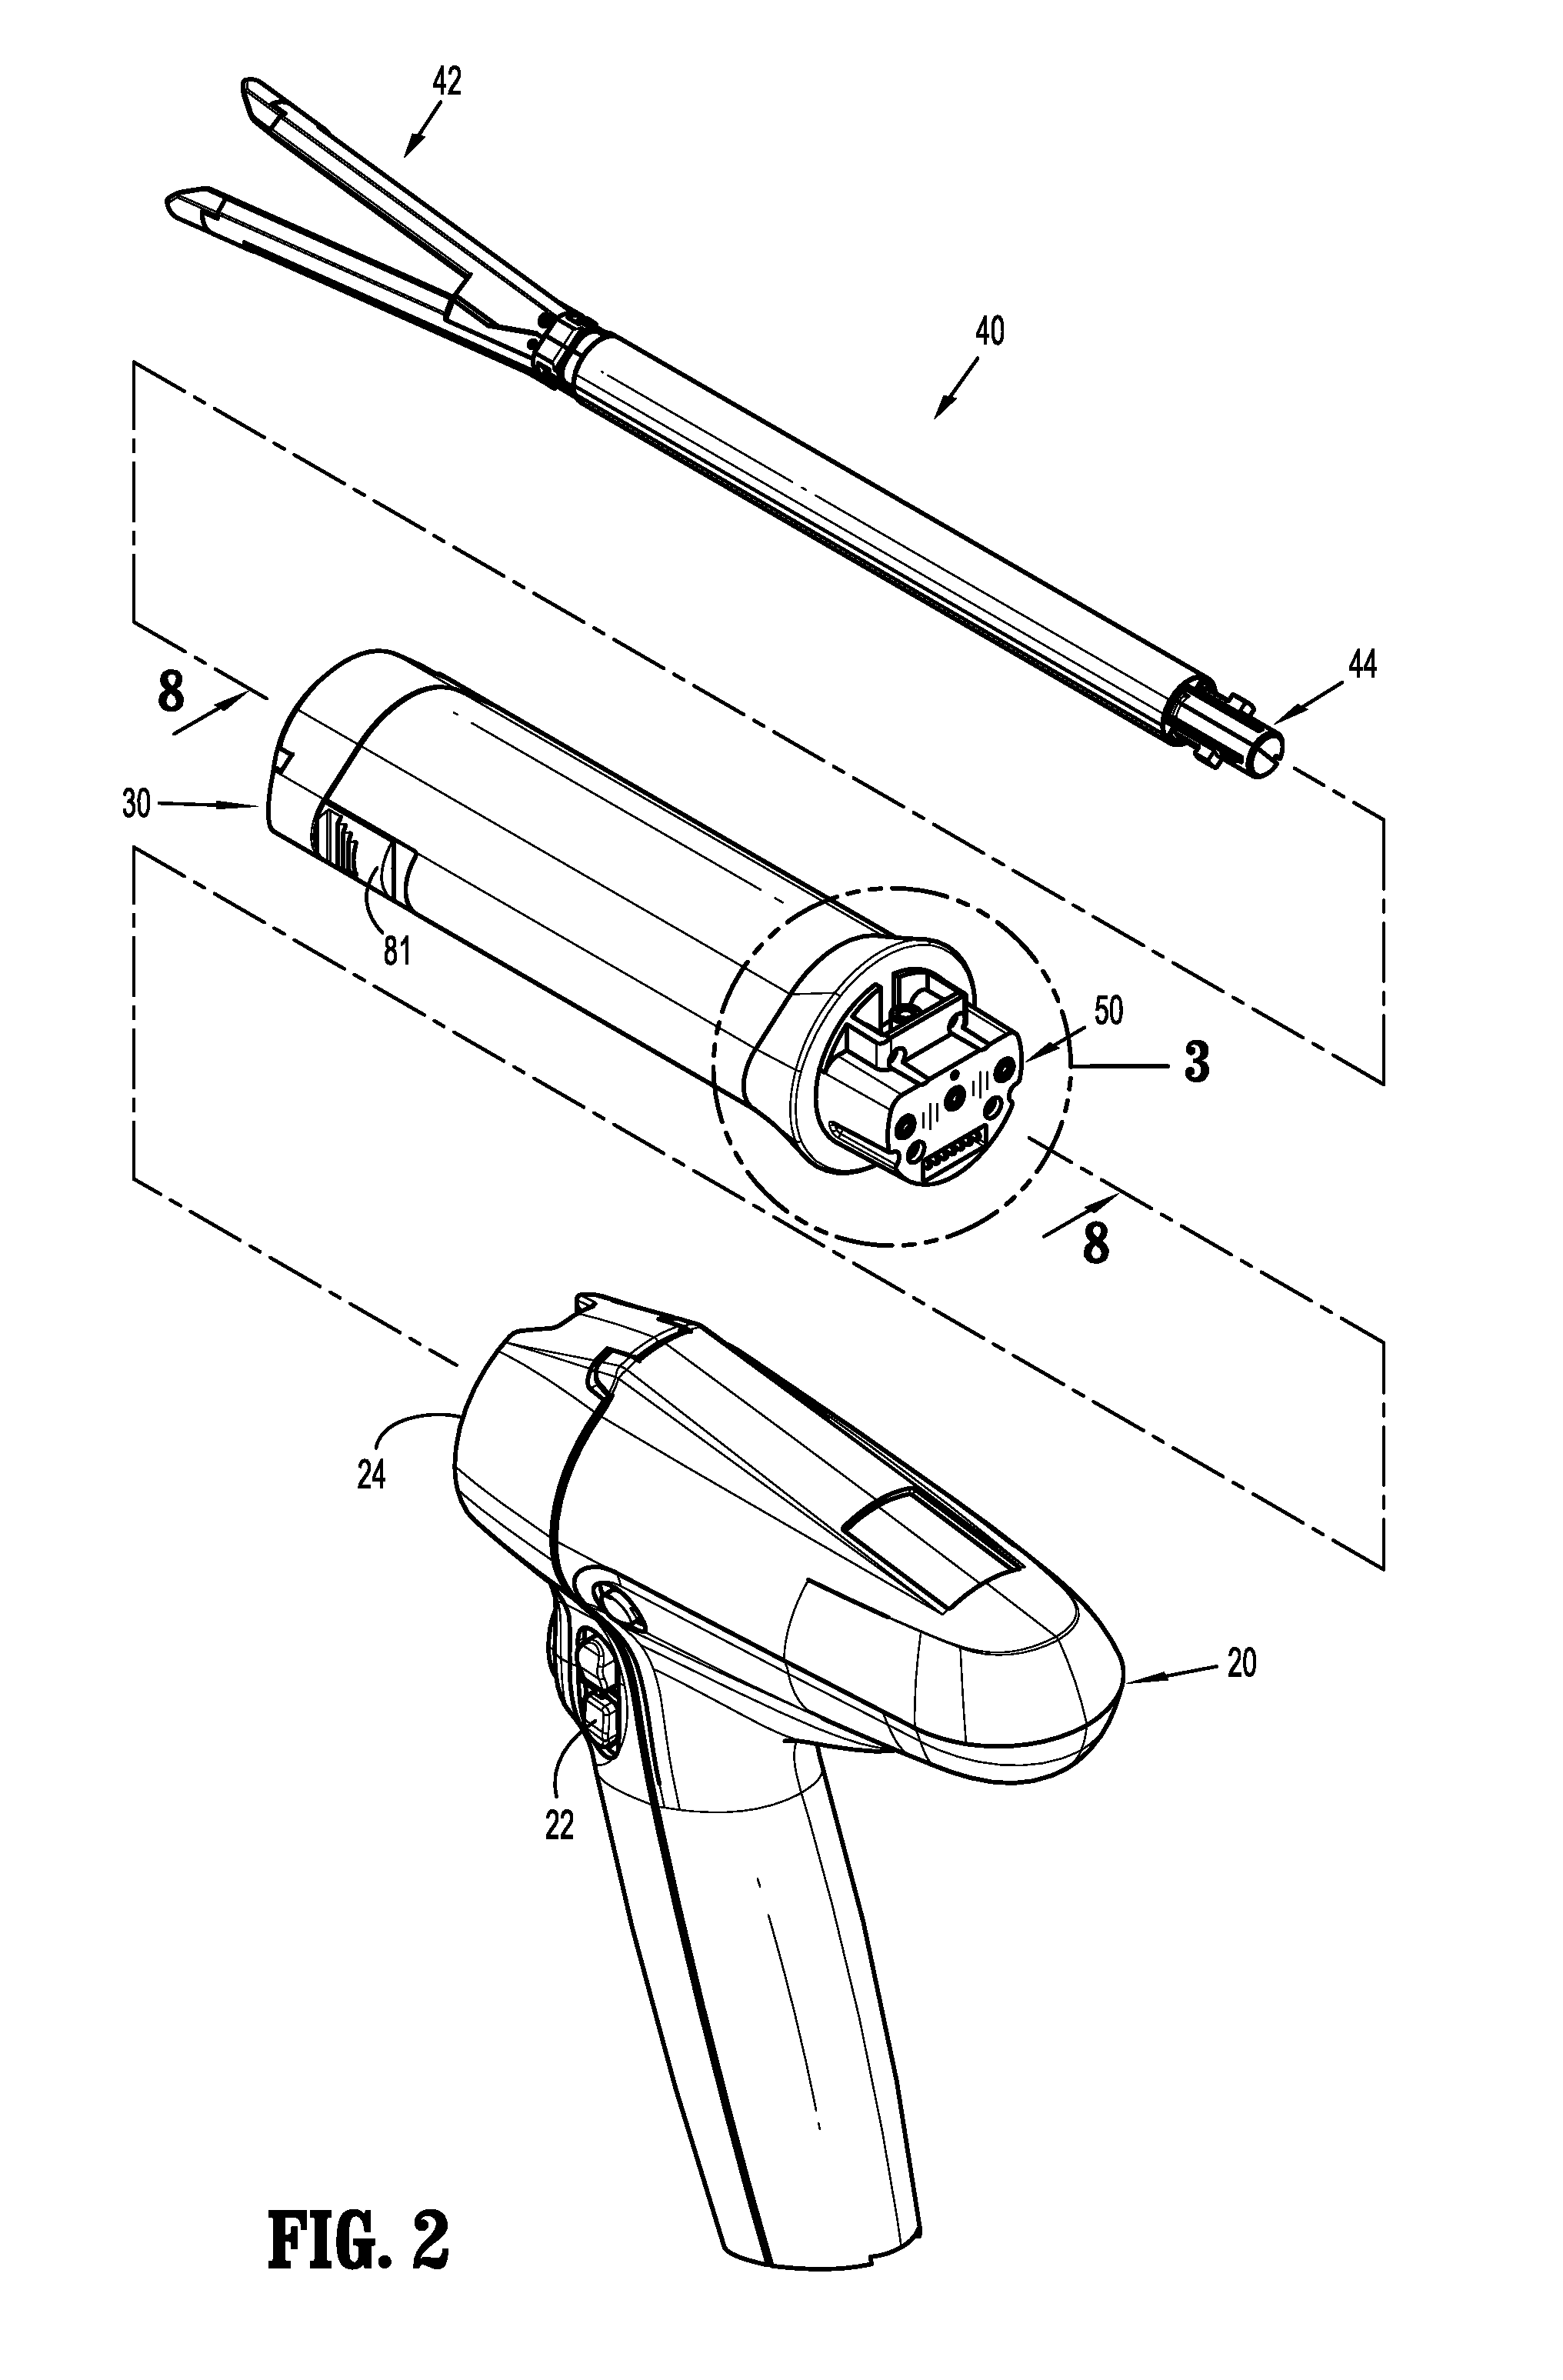 Adaptor for surgical instrument for converting rotary input to linear output